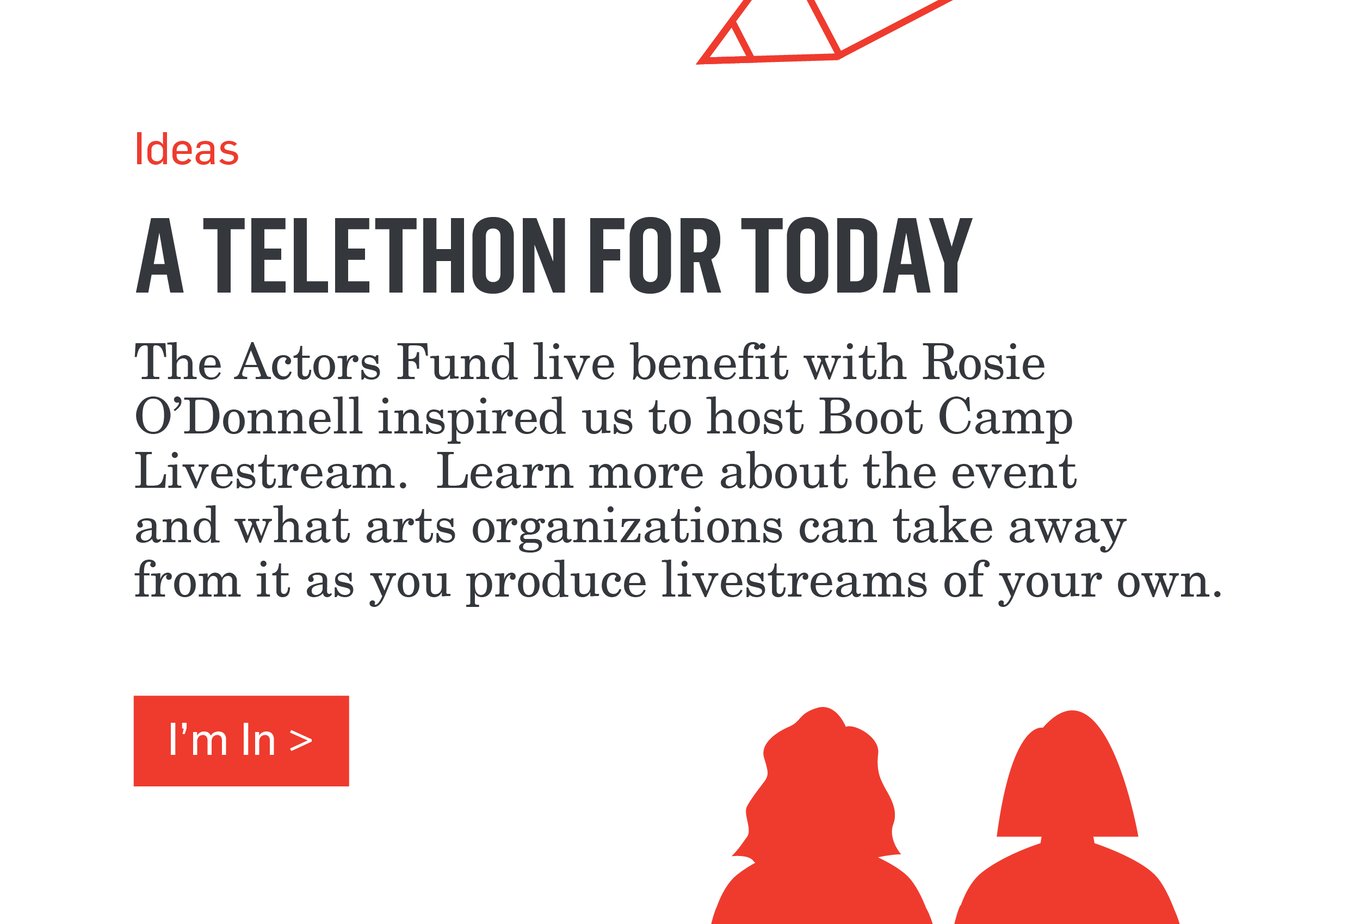 Ideas - A TELETHON FOR TODAY - The Actors Fund benefit with Rosie O'Donnell inspired us to host Boot Camp Livestream. Learn more about the event and what arts organizations can take away from it as you produce livestreams of your own. >>>I'm In>>>